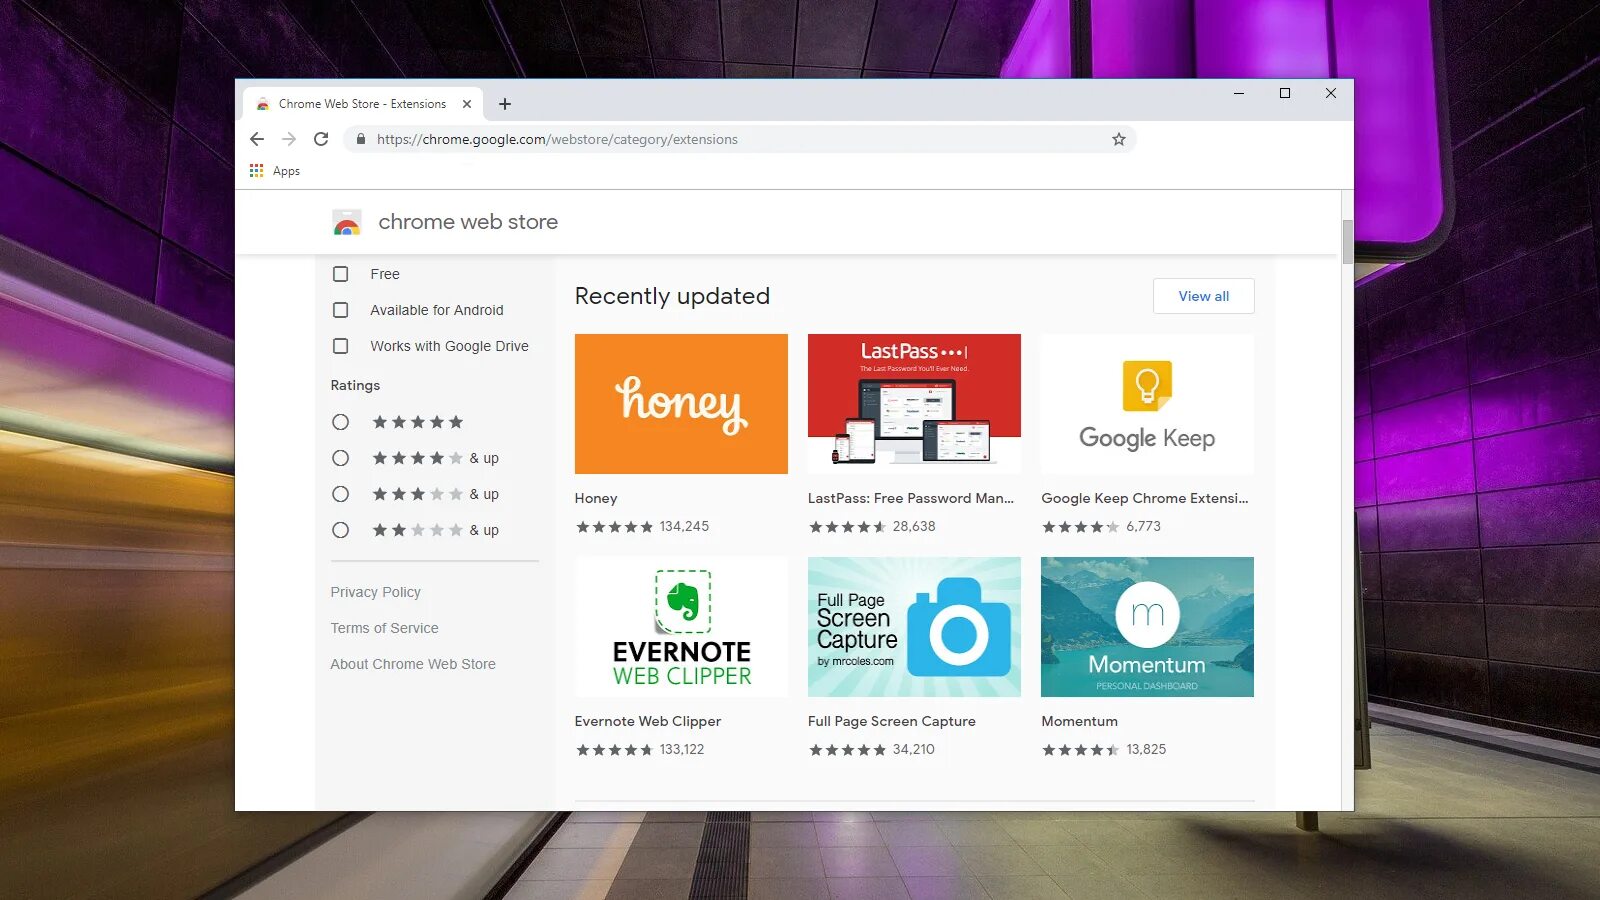 Chrome web store extensions. Chrome Store. Chrome Extensions Store. Chrome web. Google Chrome web Store Extensions.